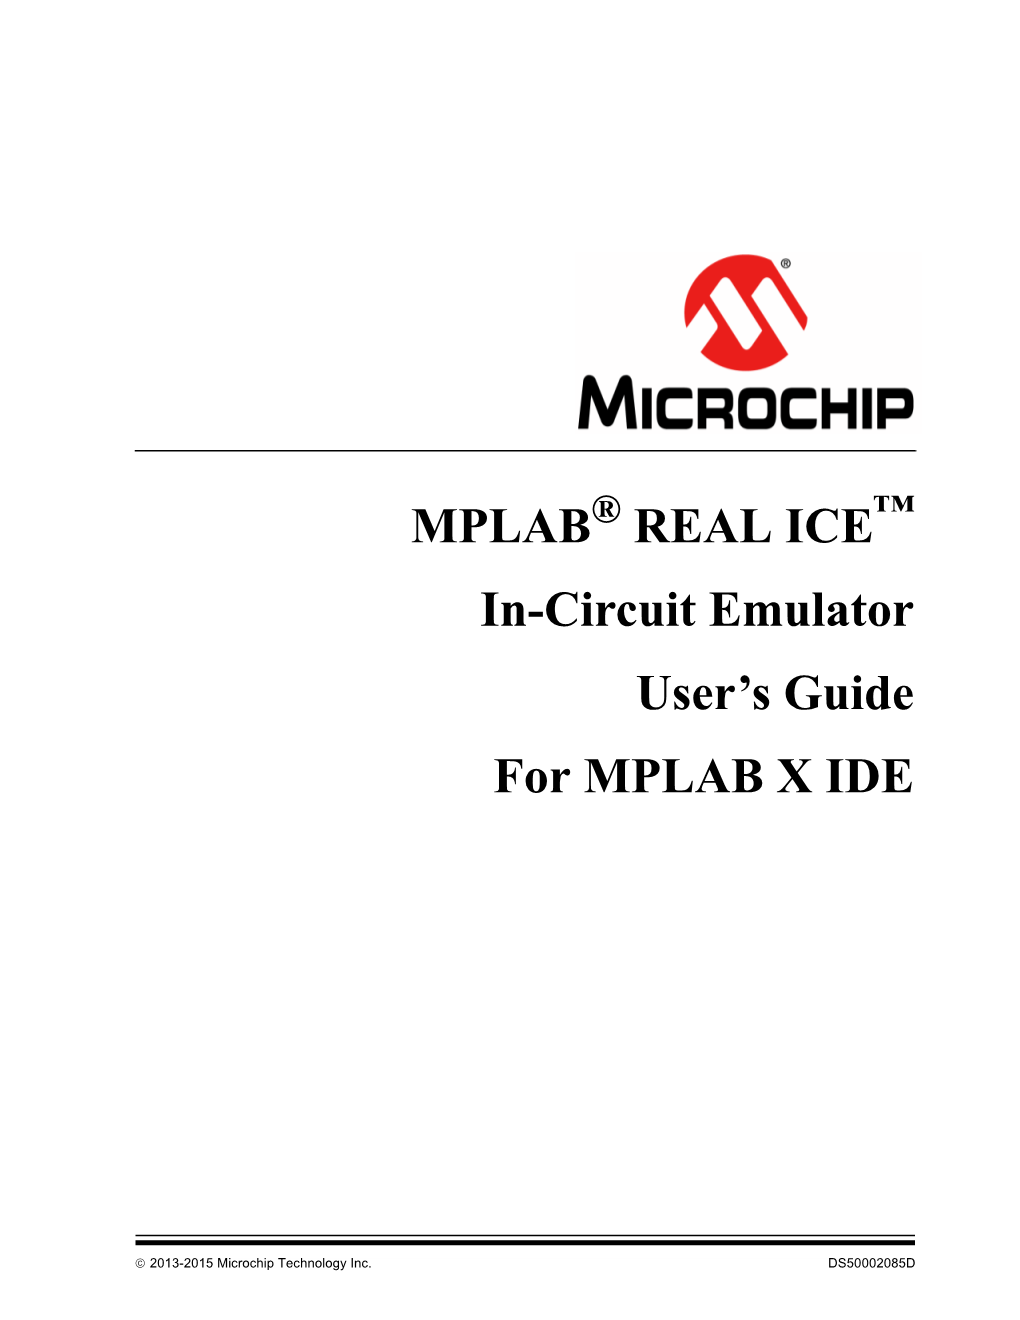 MPLAB REAL ICE In-Circuit Emulator User's Guide for MPLAB X